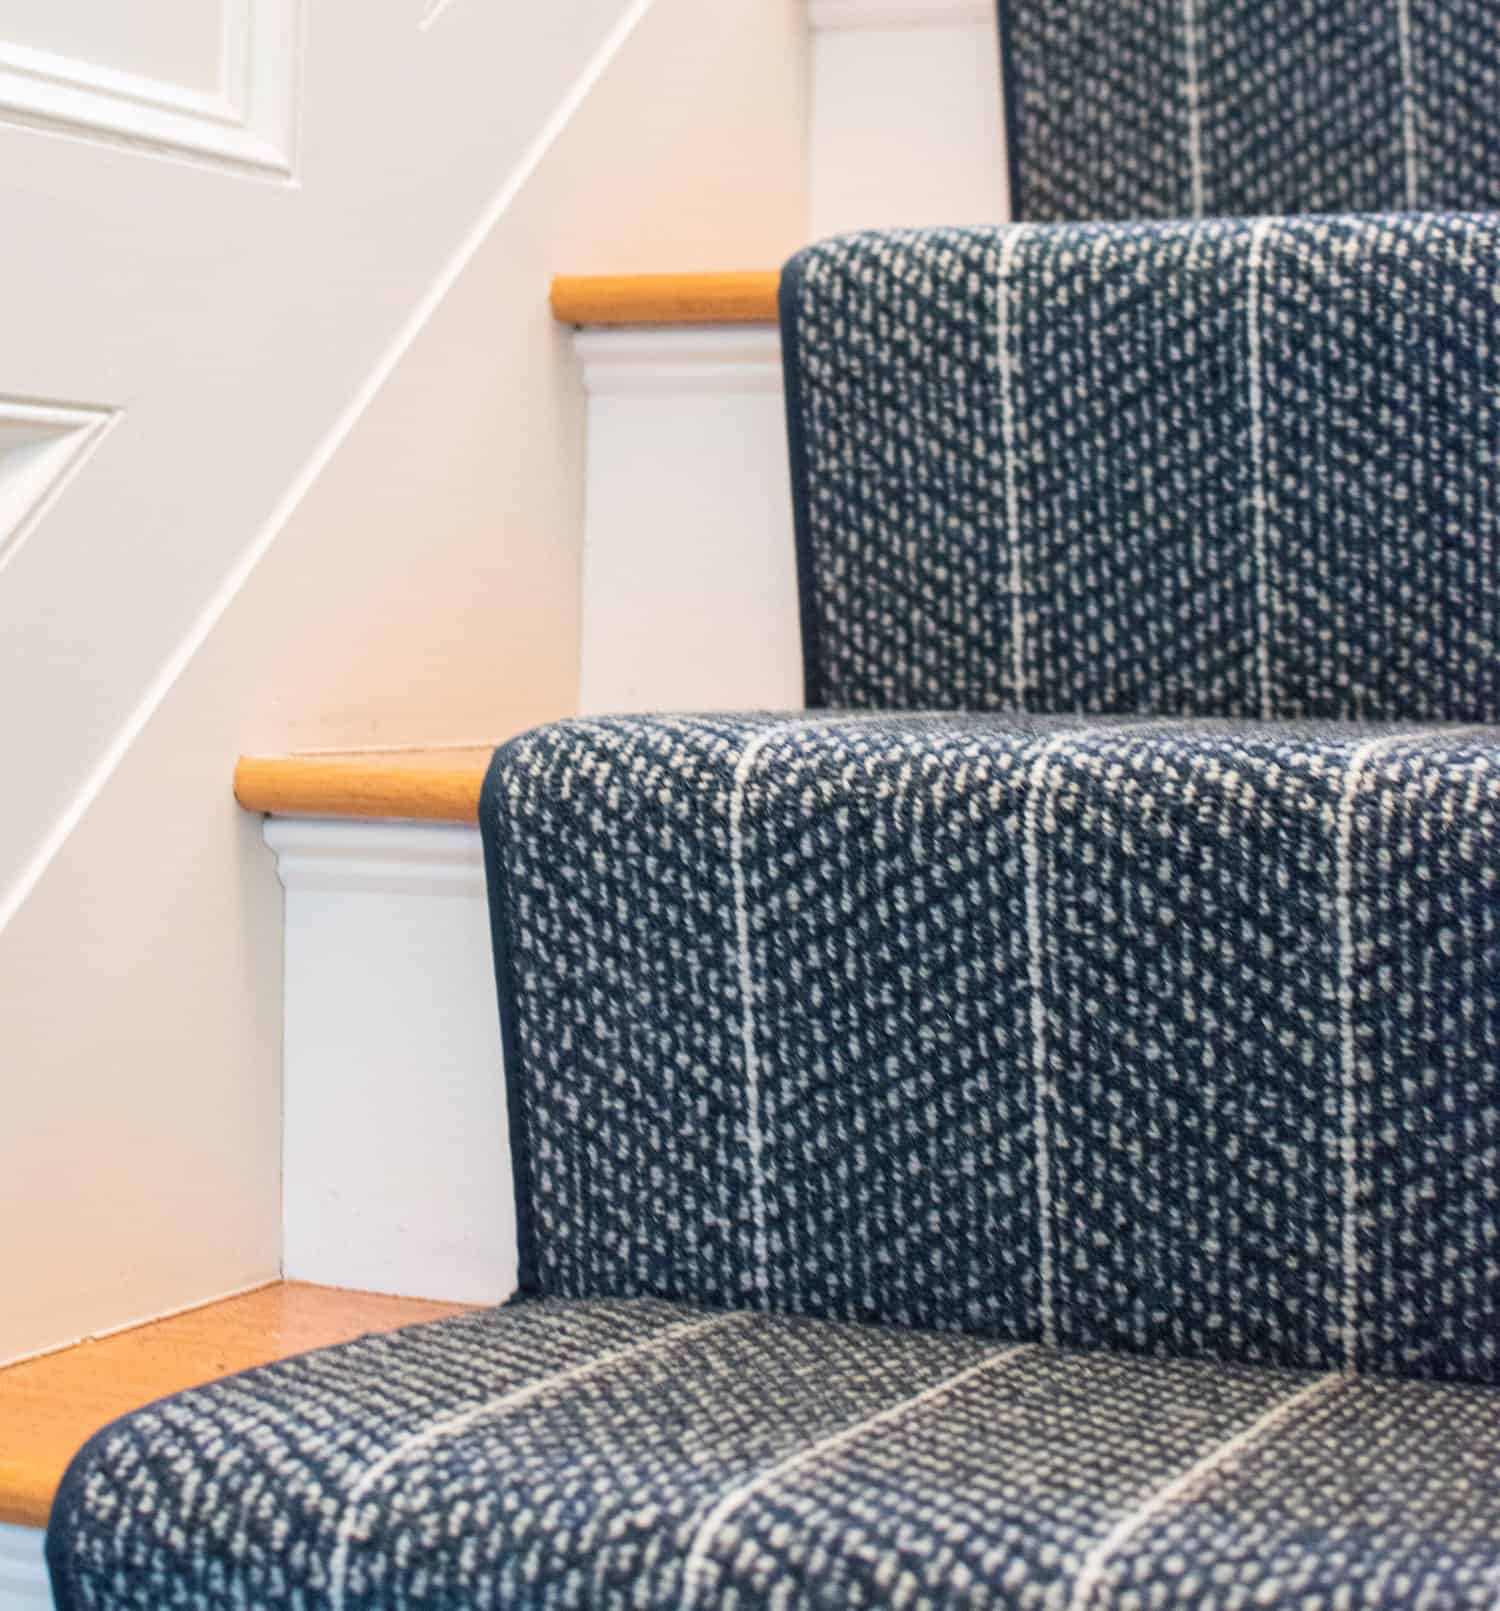 This is a navy blue and white striped carpet that is fabricated and installed as a stair runner